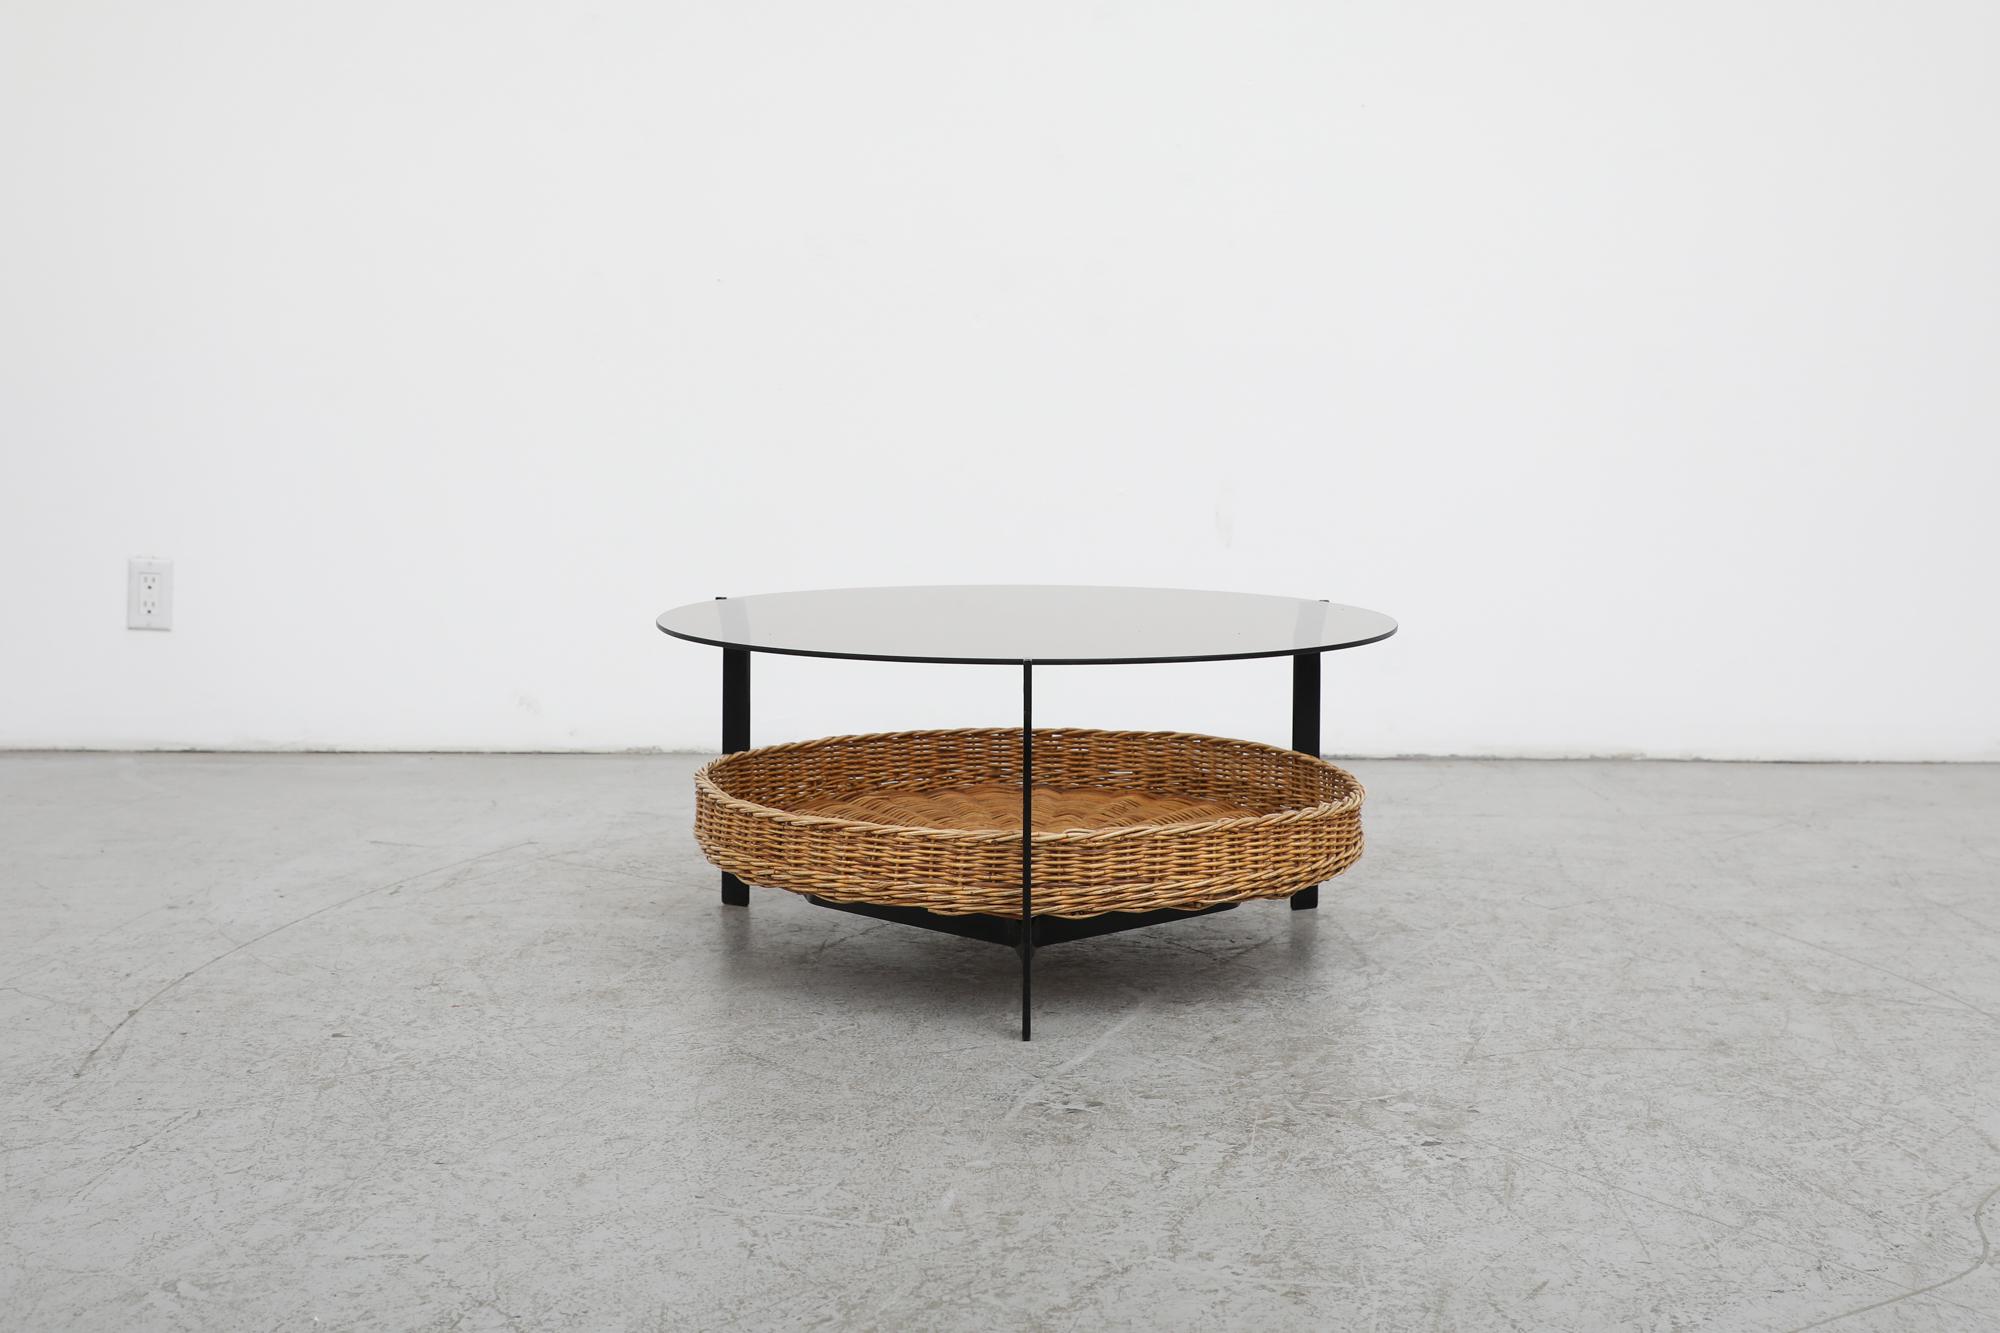 Enameled Mid-Century Modernist Coffee Table with Smoked Glass and Rattan Basket For Sale